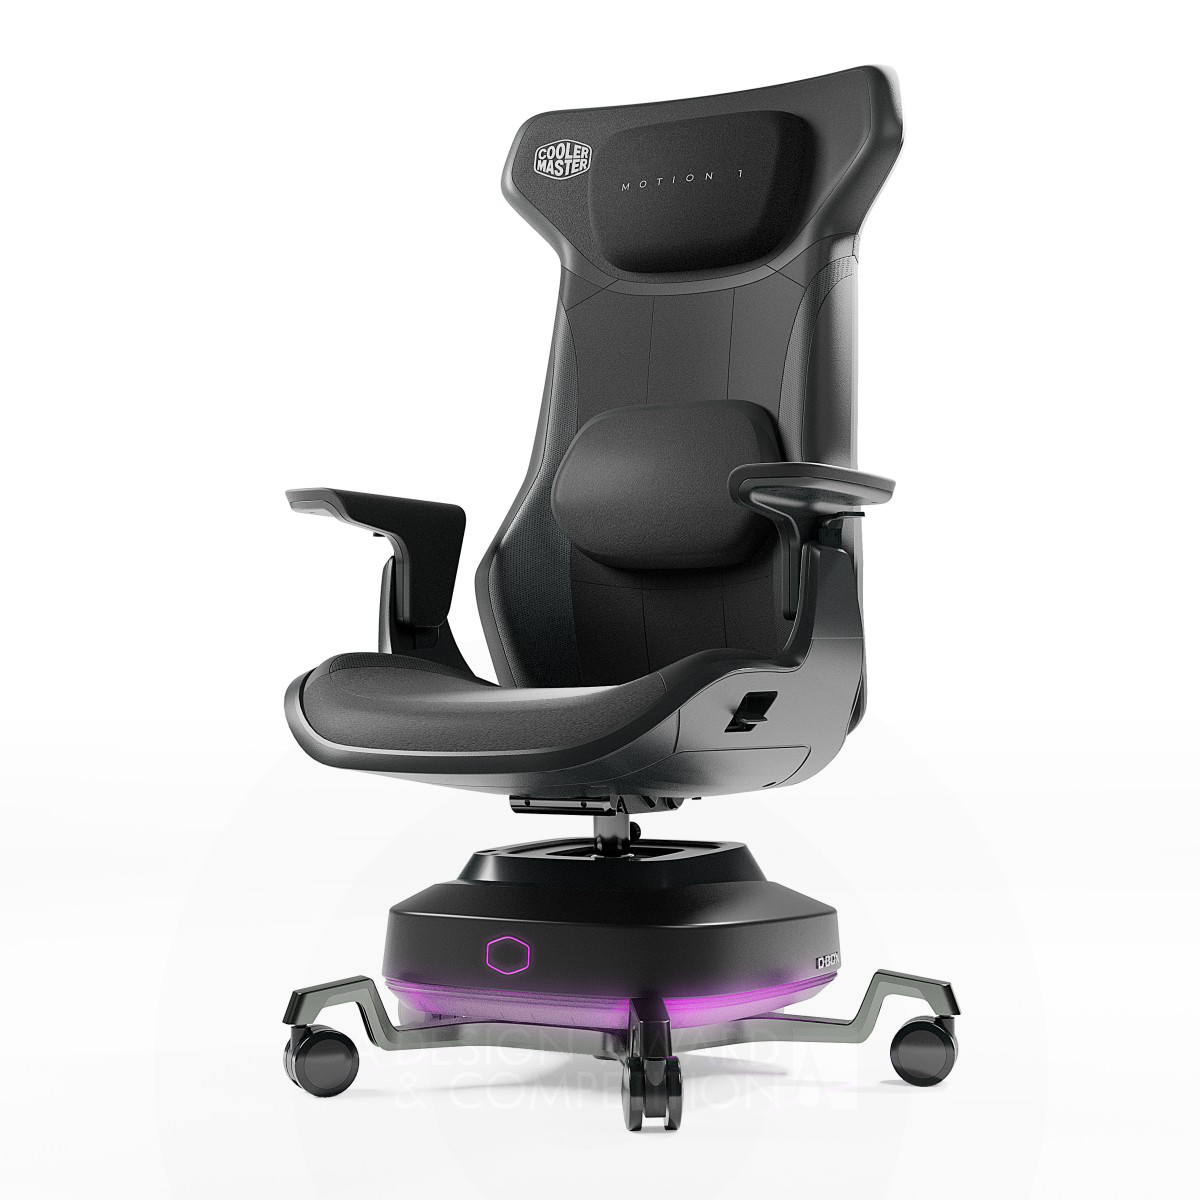 Shakes Bkk Introduces Motion 1: A Haptic Gaming Chair Redefining Immersive Experiences